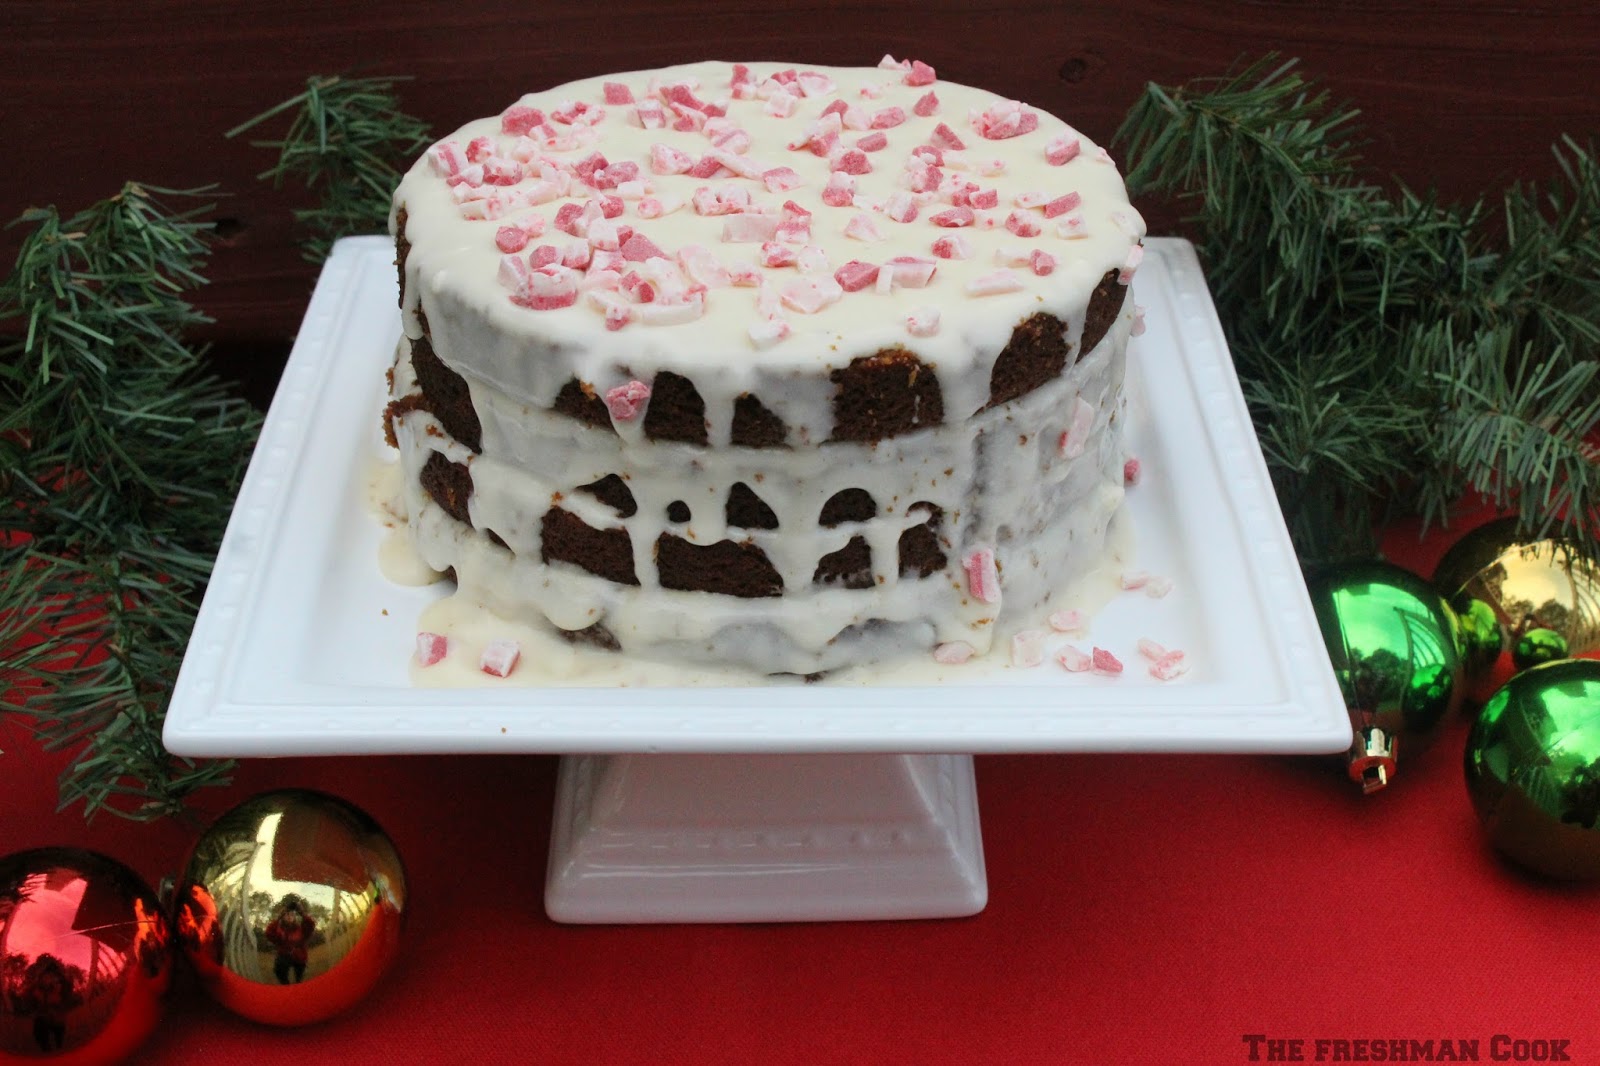 Gingerbread Layer Cake Recipe by The Redhead Baker